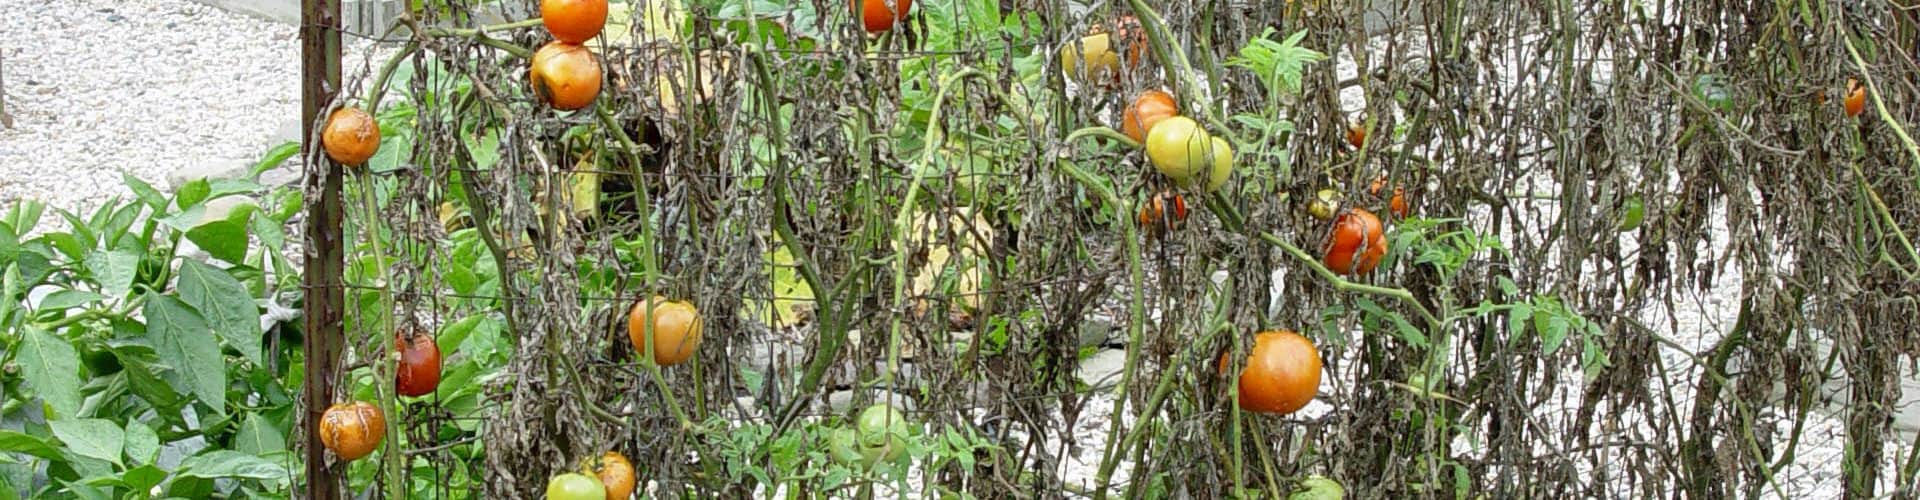 How often should you water your tomato plants Idea